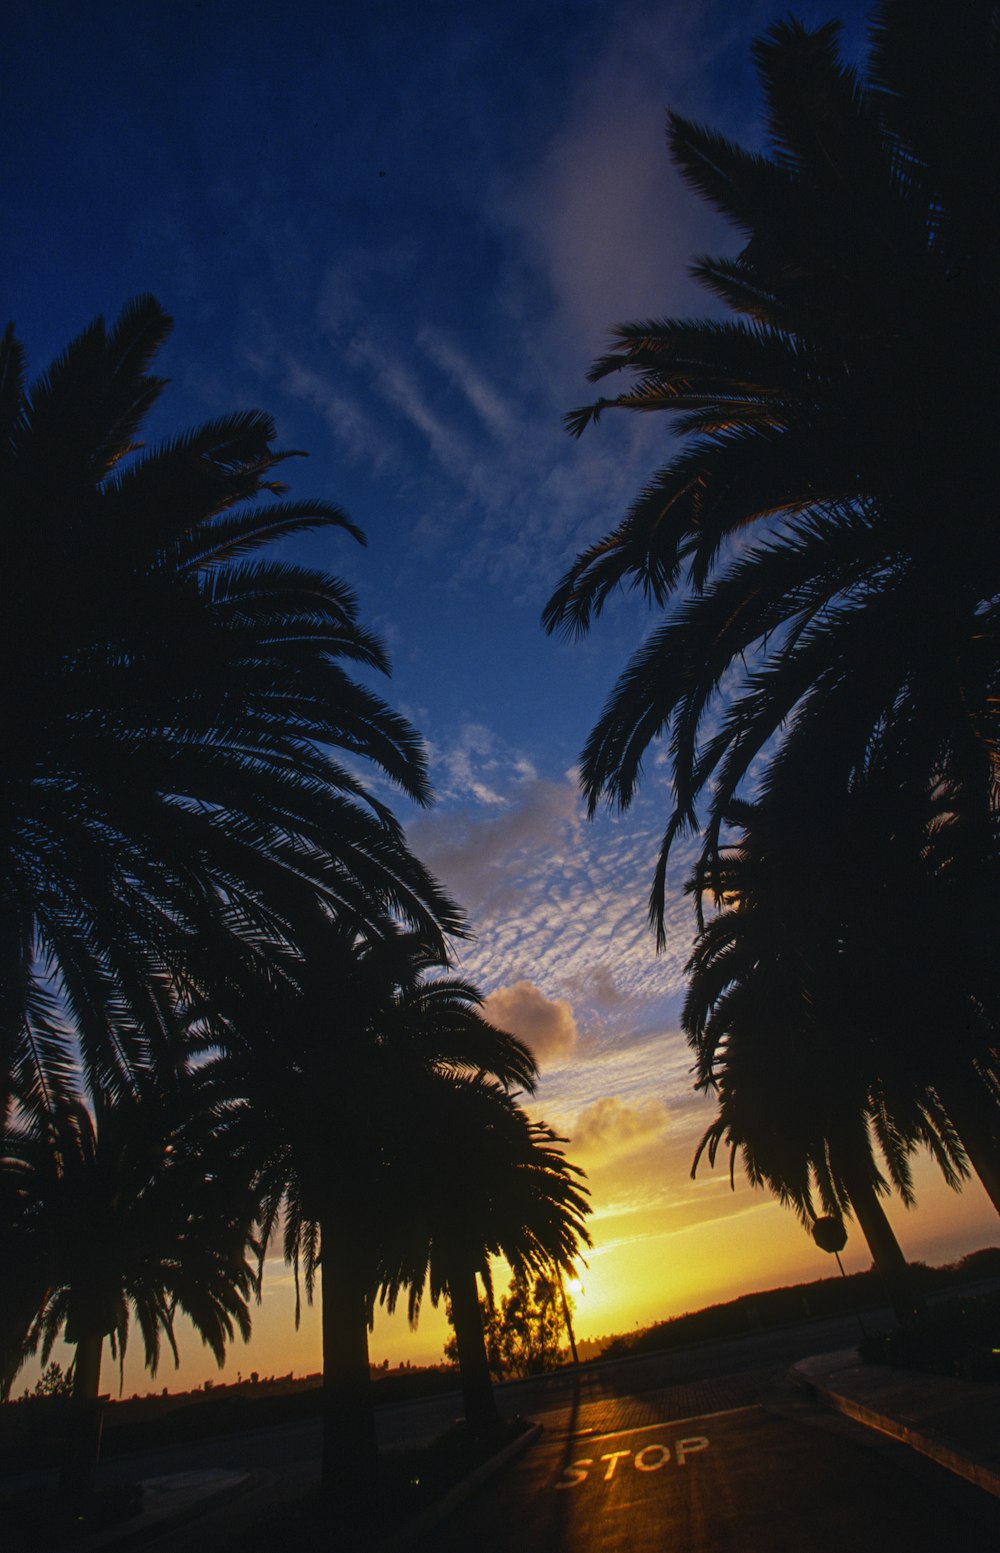 silhouette of palm trees during sunset